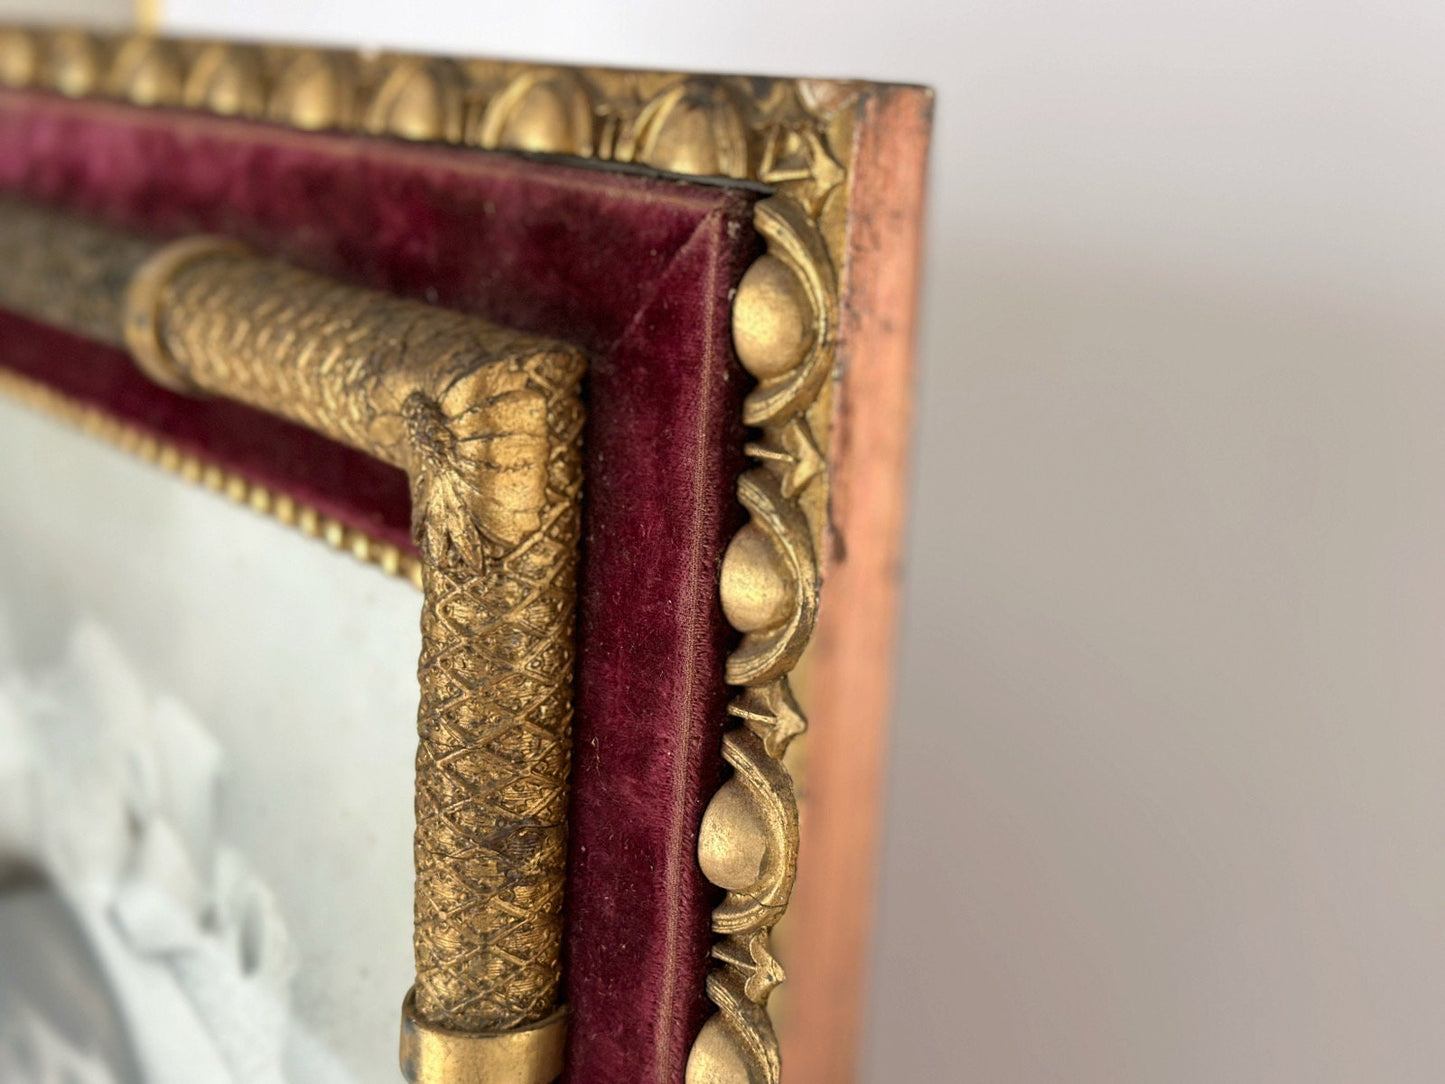 A close up view of the side edge of this stunning ornate antique frame show a copper finish on the outside. You can see how the gold finish on this Victorian frame come to life next to the copper and red velvet.